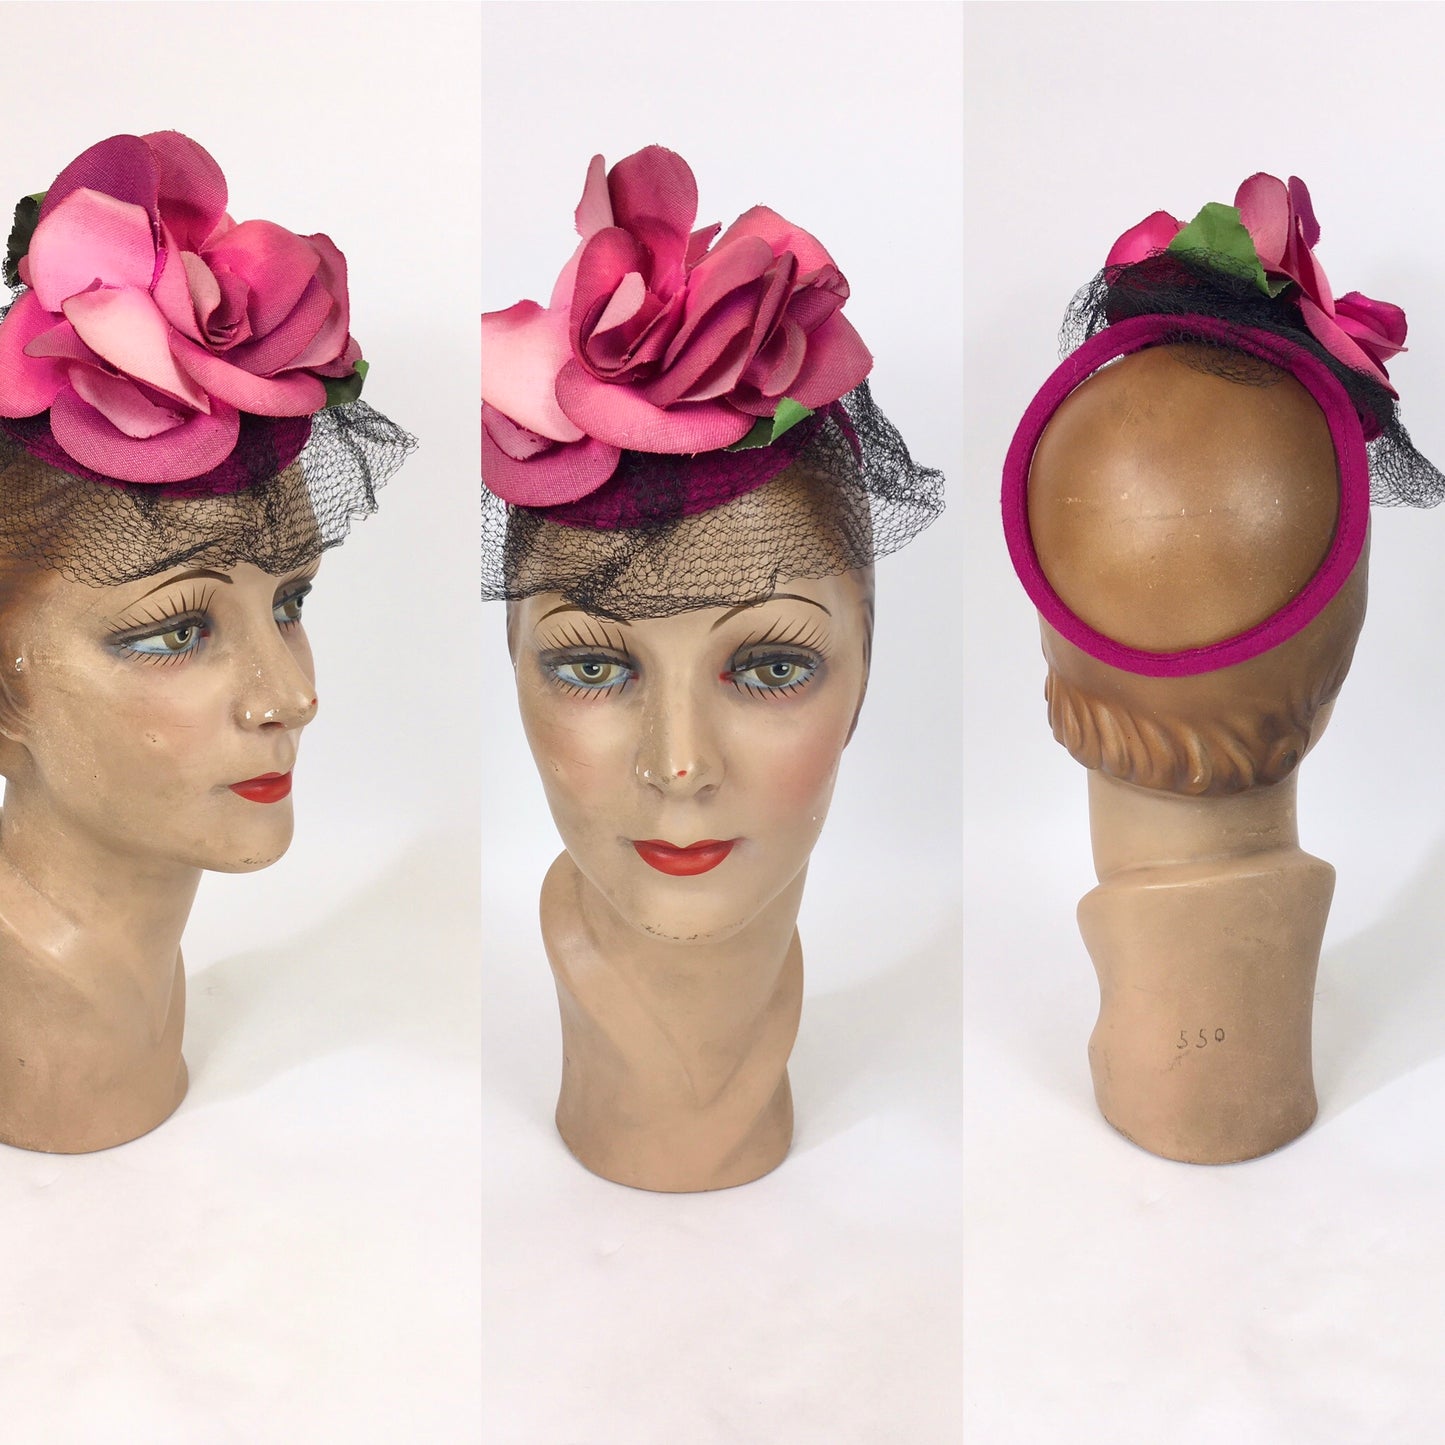 Original 1940’s Stunning Toy Topper Tilt Hat - In Cerise Pink with Floral Millinery and Veiling